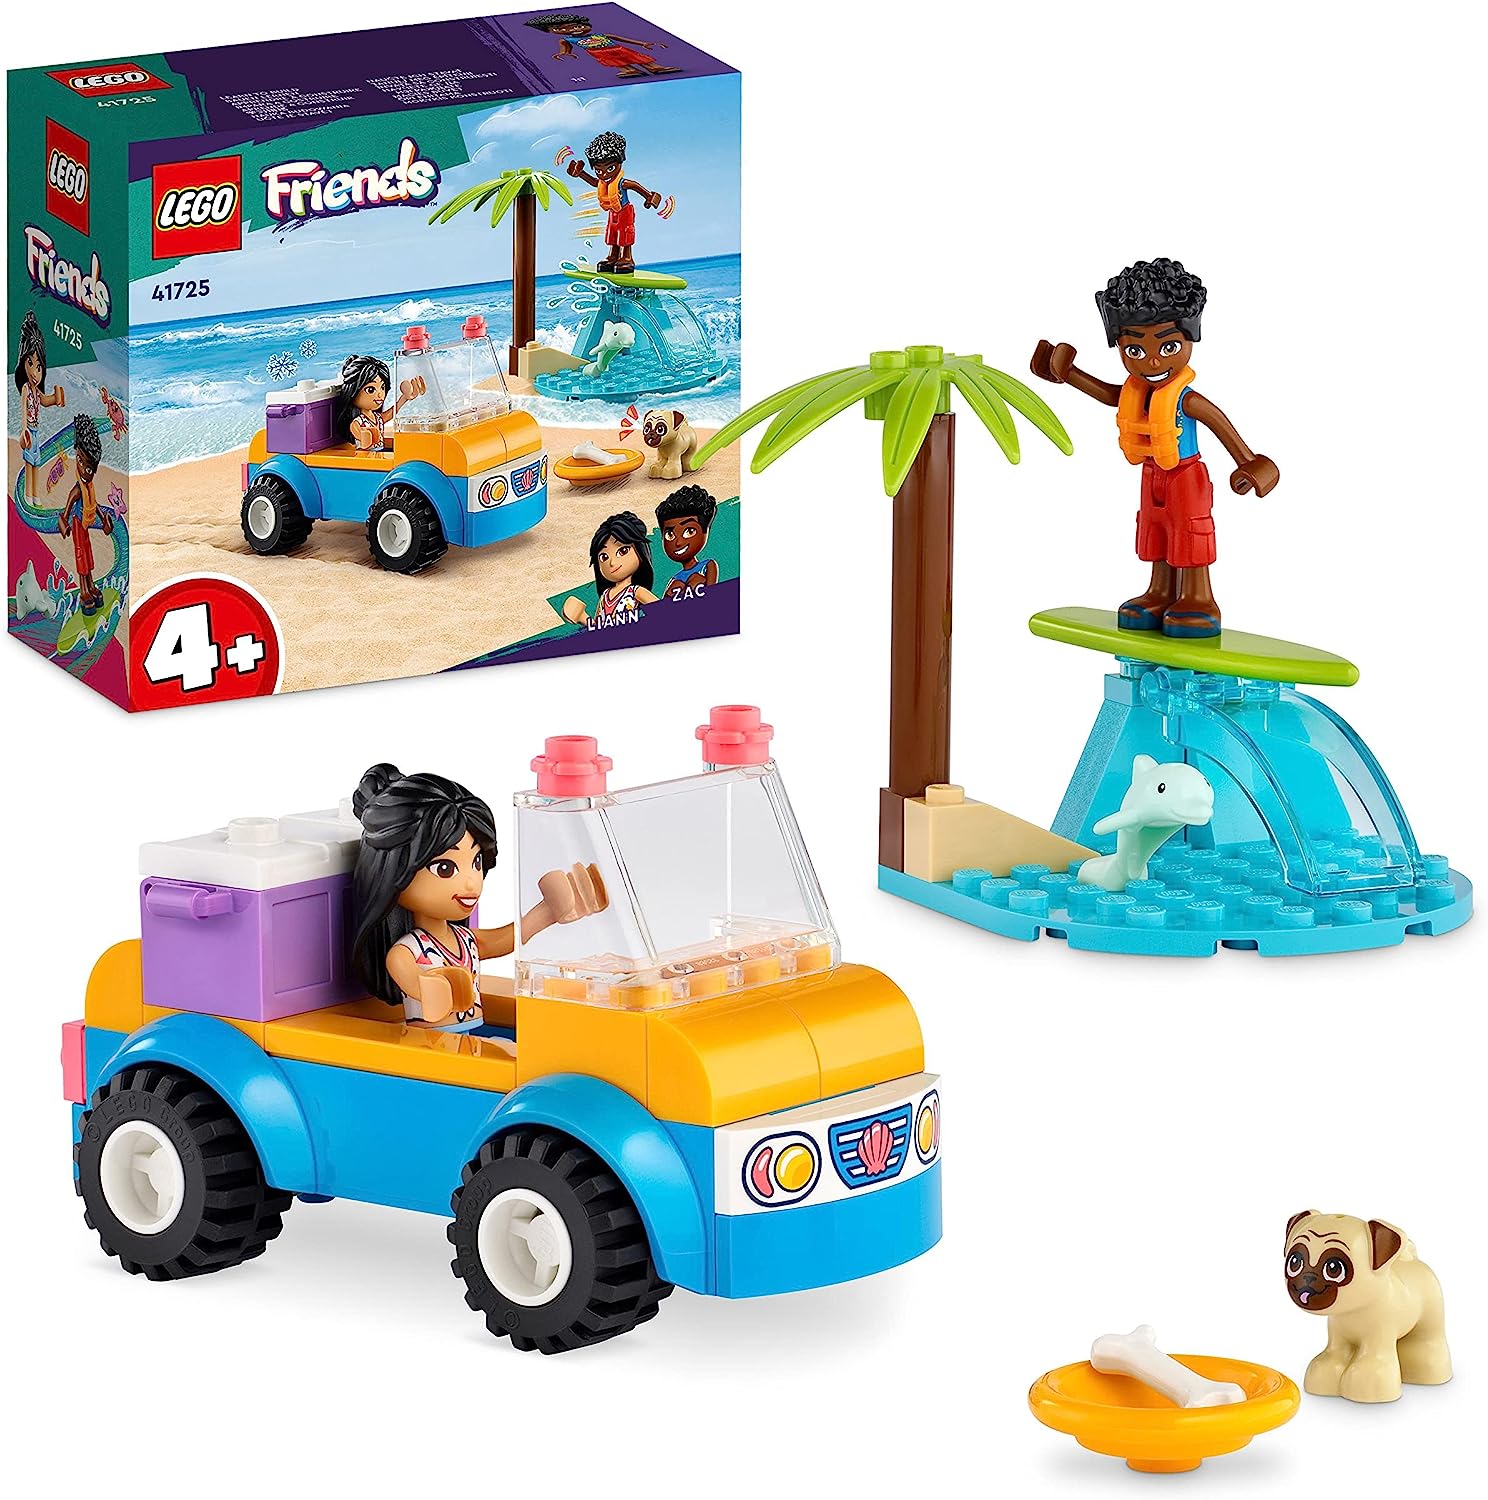 LEGO 41725 Friends Beach Buggy Fun Set with Toy Car, Surfboard, Mini Dolls and Dolphin and Dog Animal Figures, Summer Playset for Kids, Girls and Boys From 4 Years